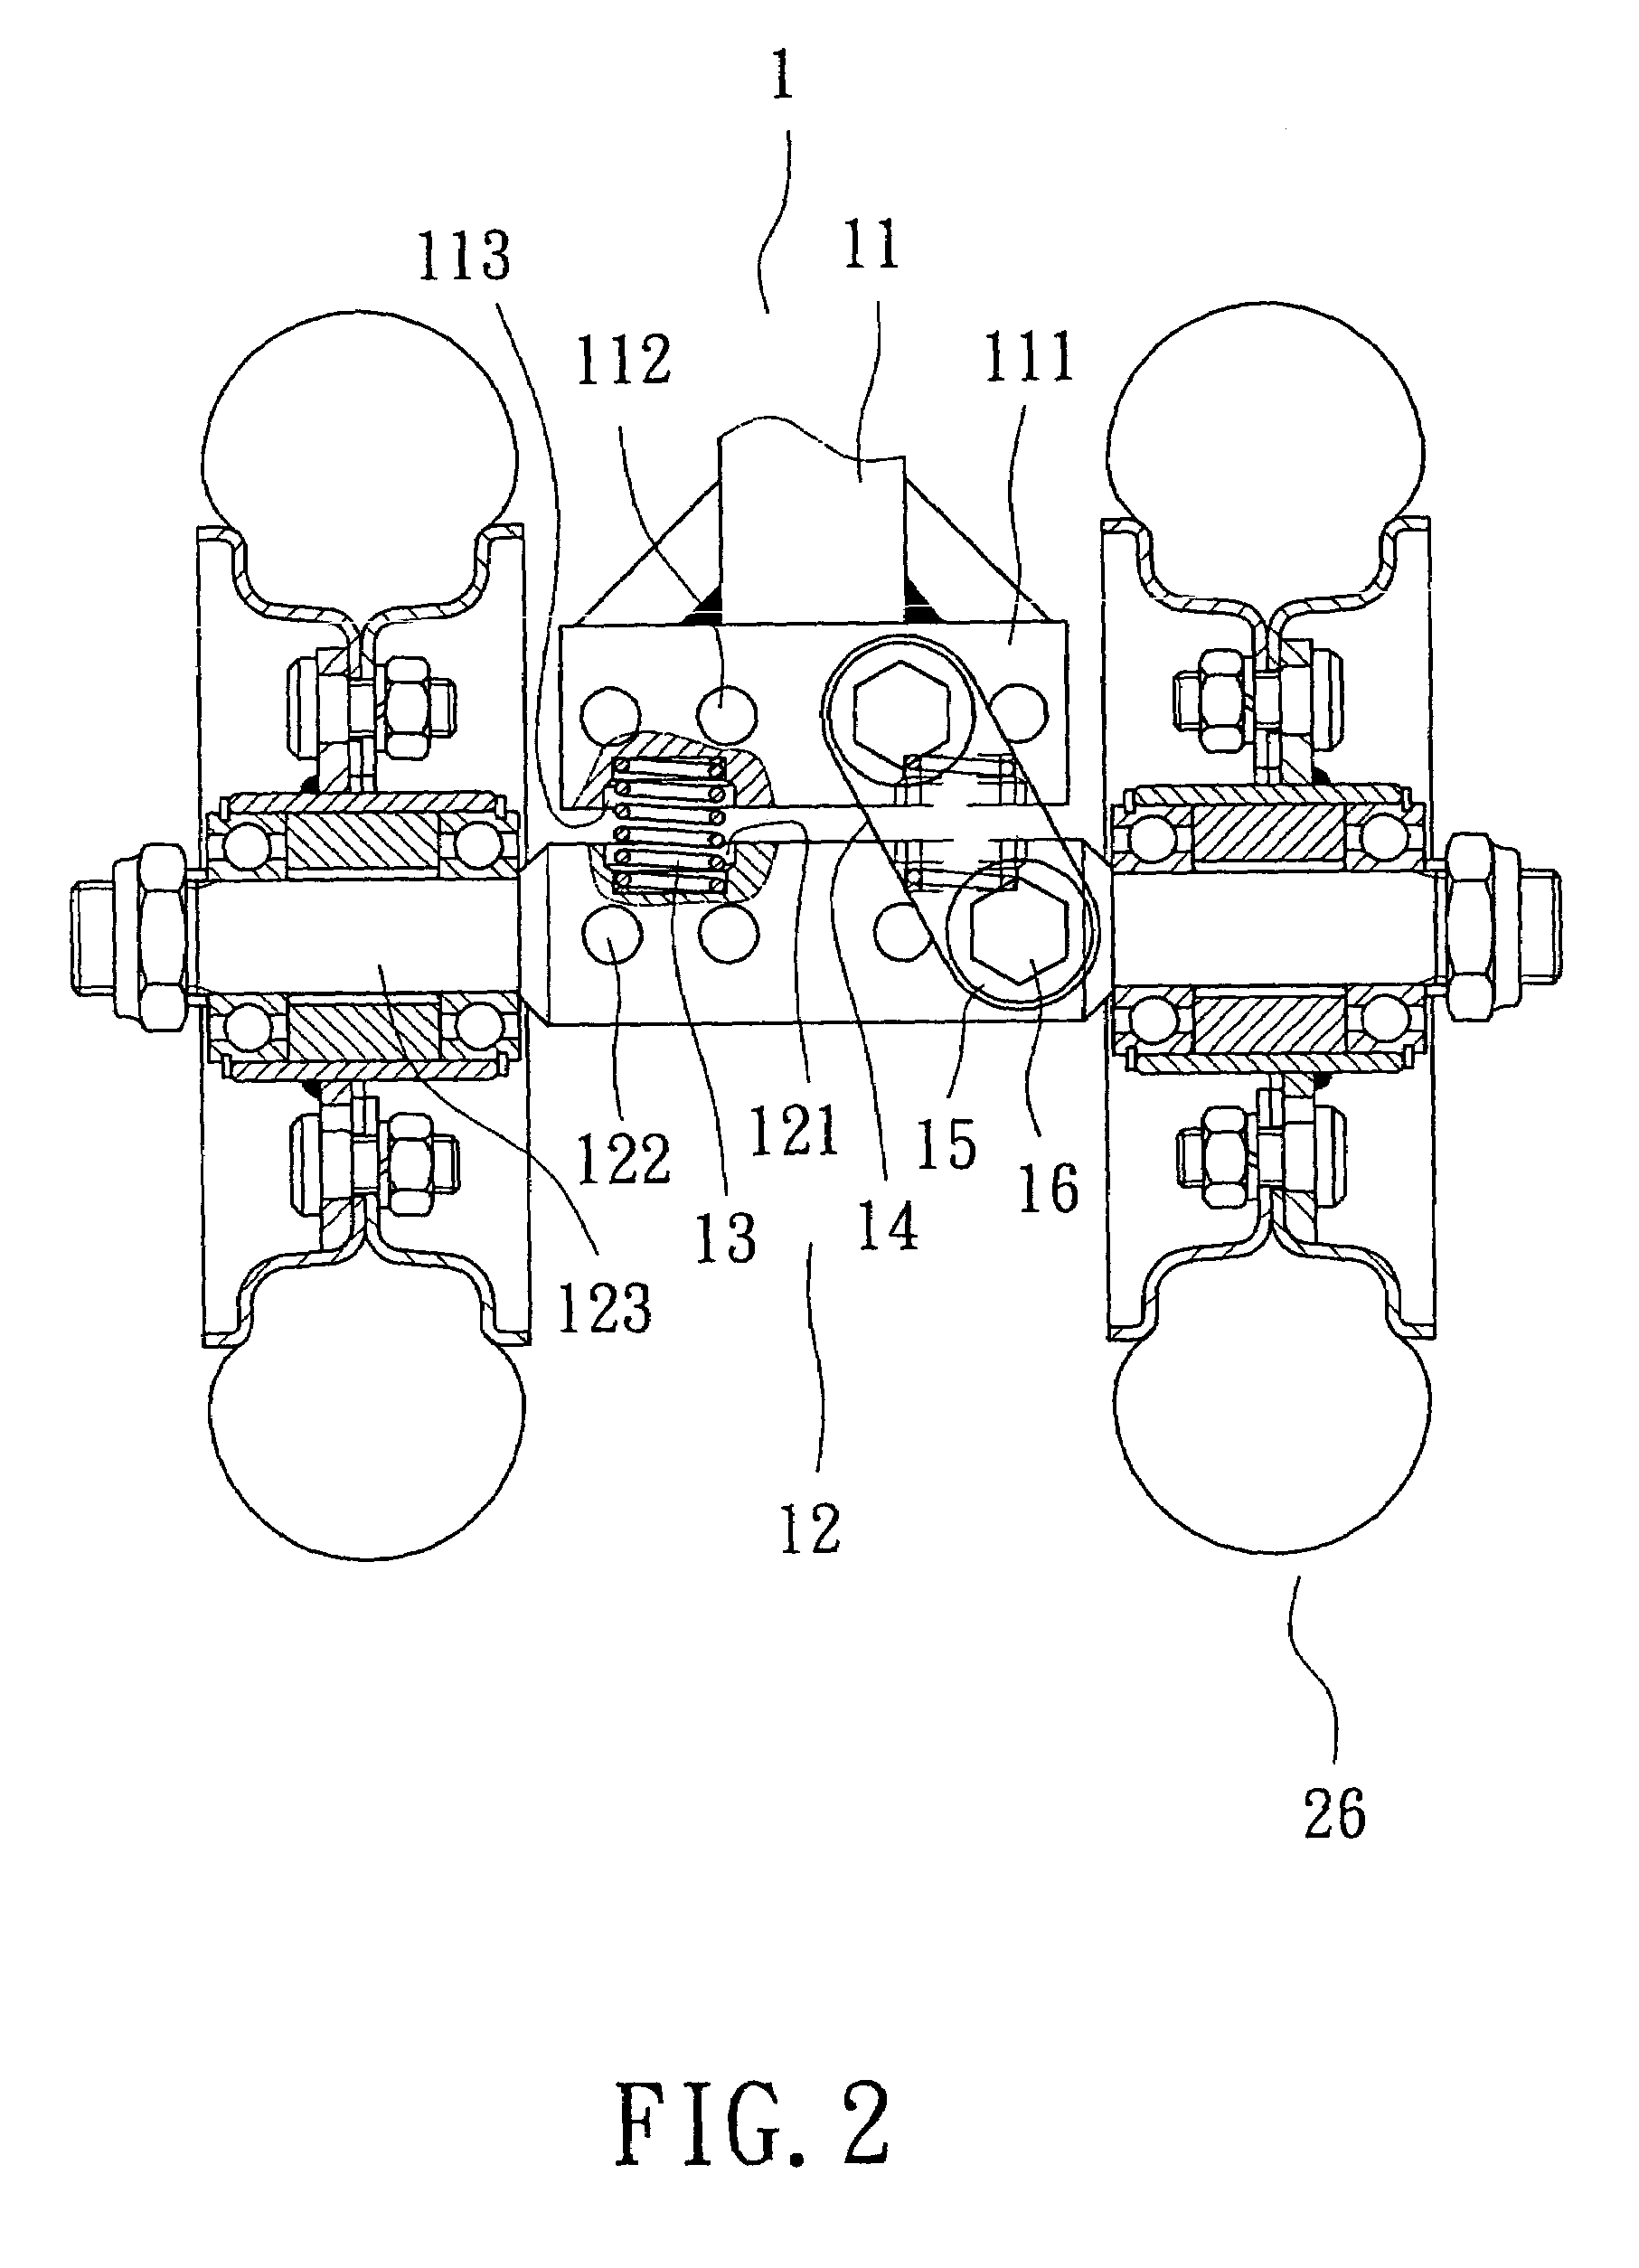 Shock absorbing structure of turning mechanism of an electric cart equipped with twin front wheels